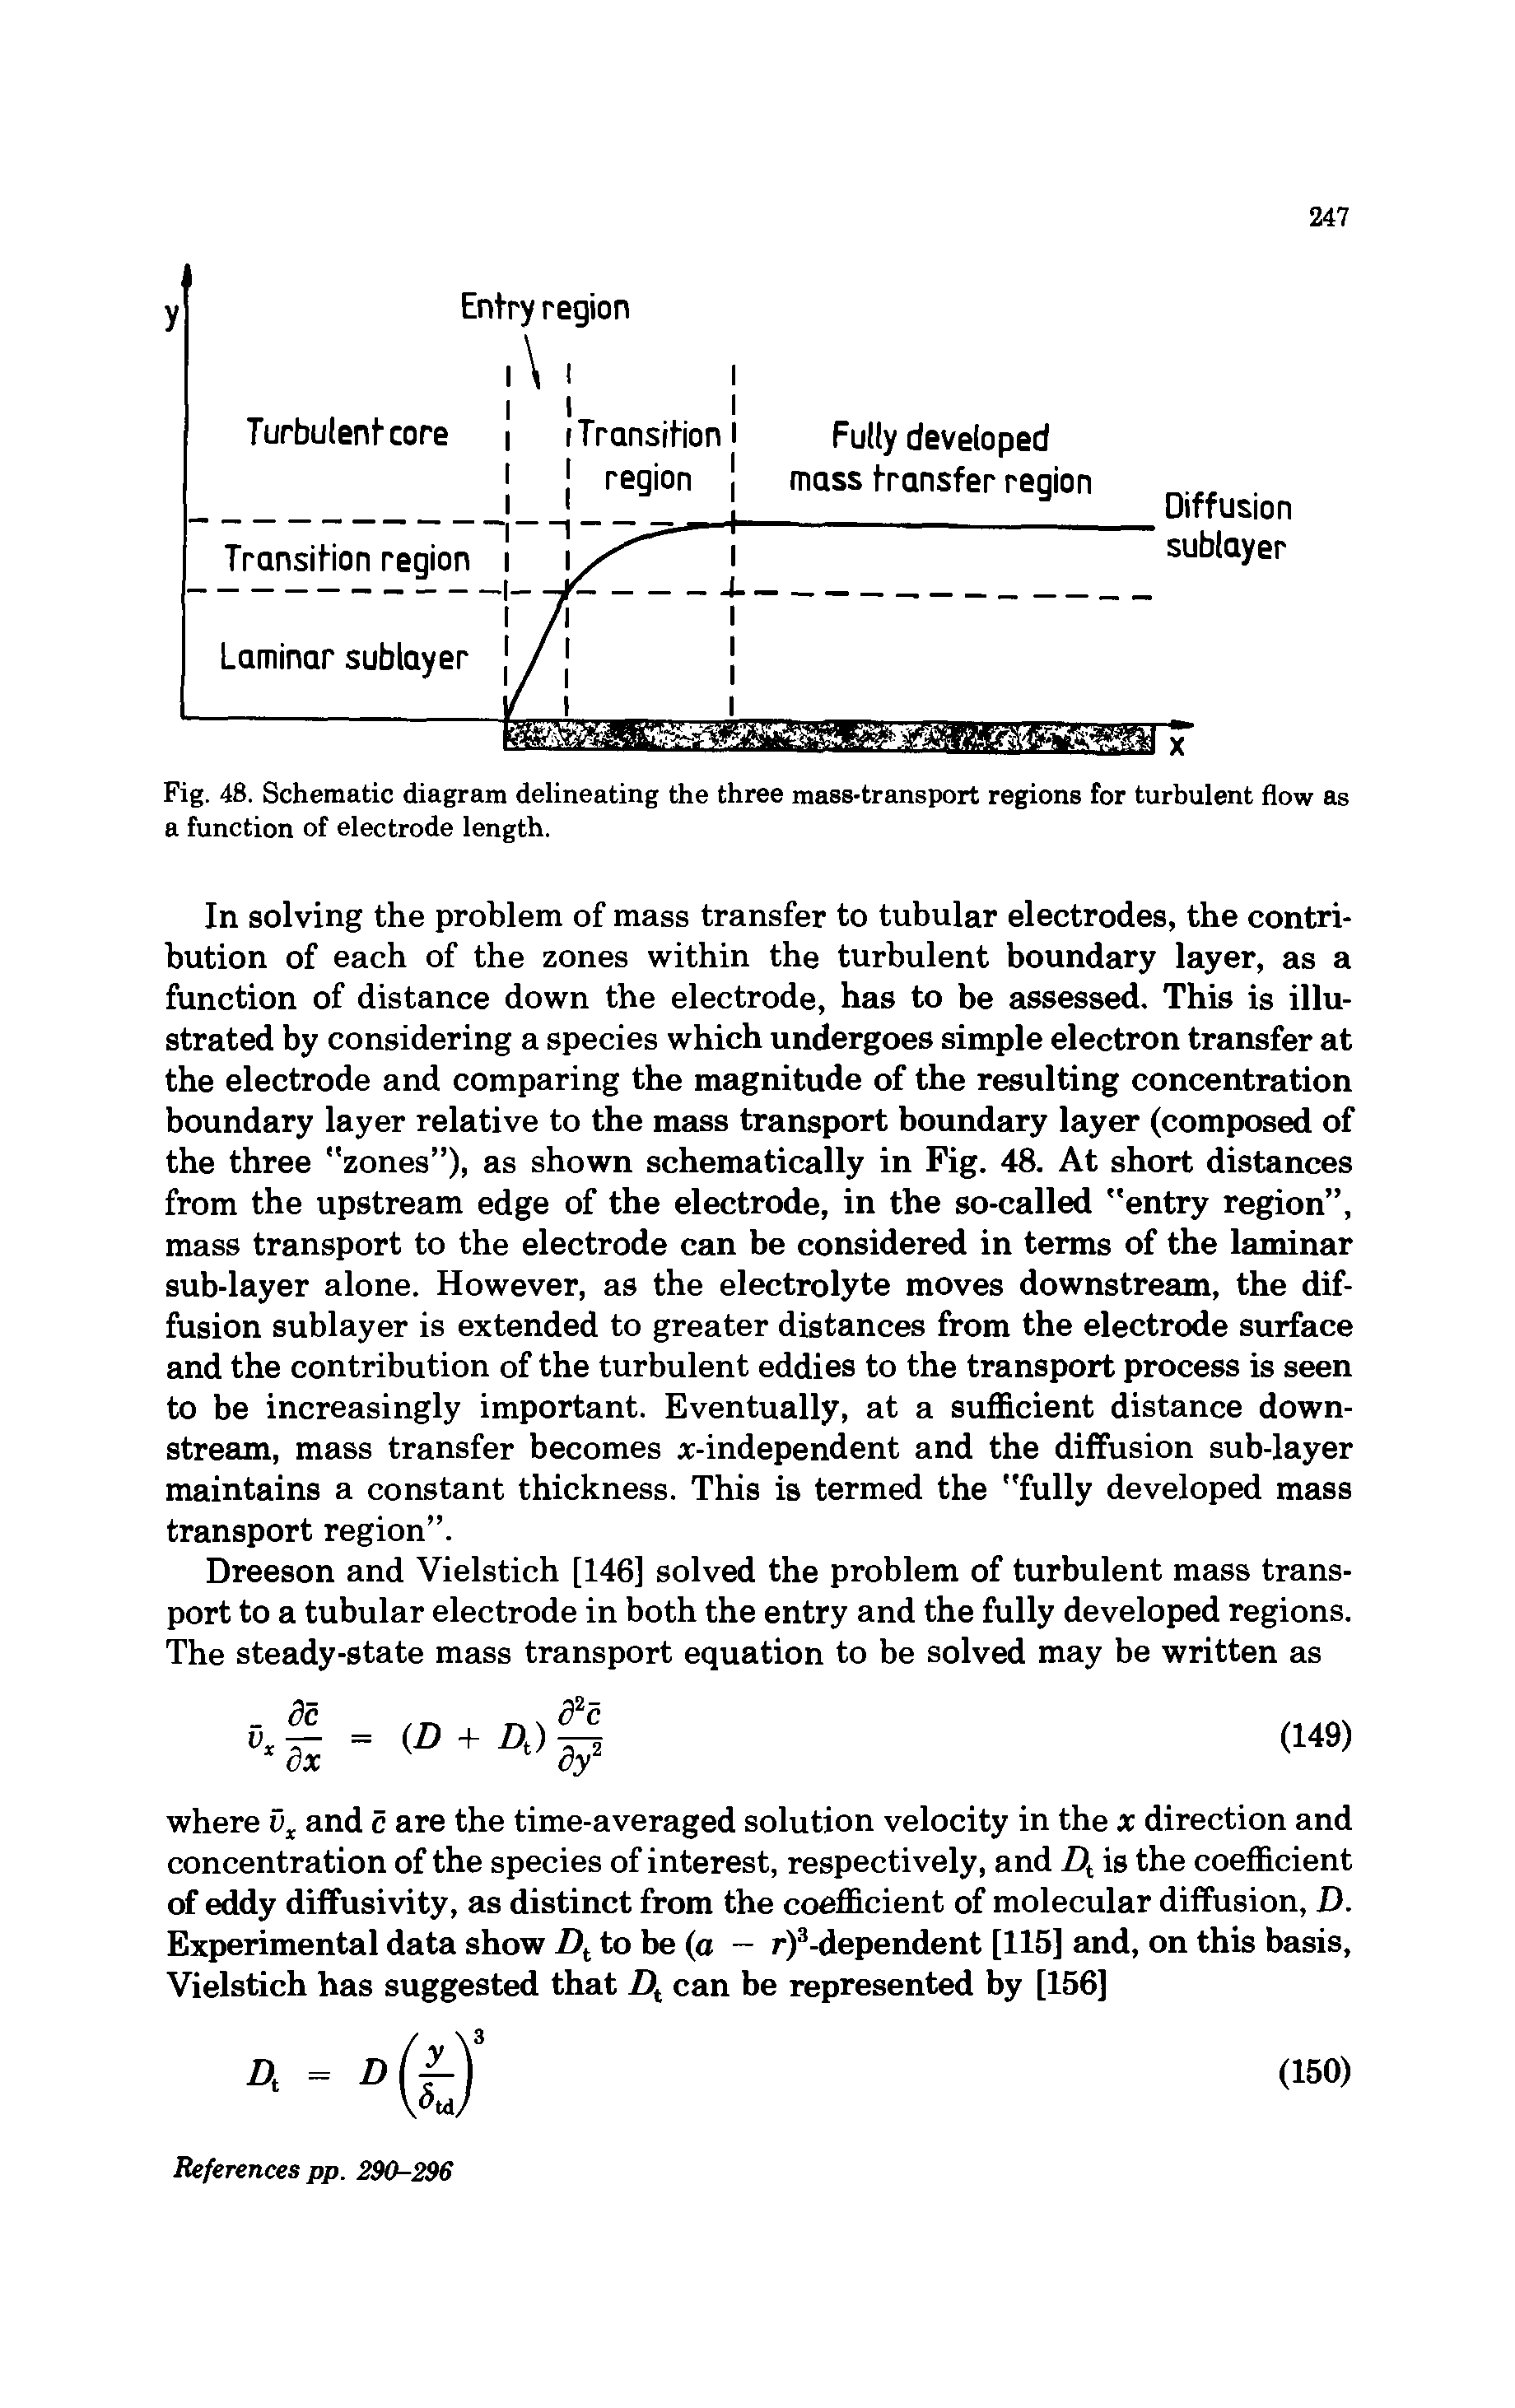 Fig. 48. Schematic diagram delineating the three mass-transport regions for turbulent flow as a function of electrode length.